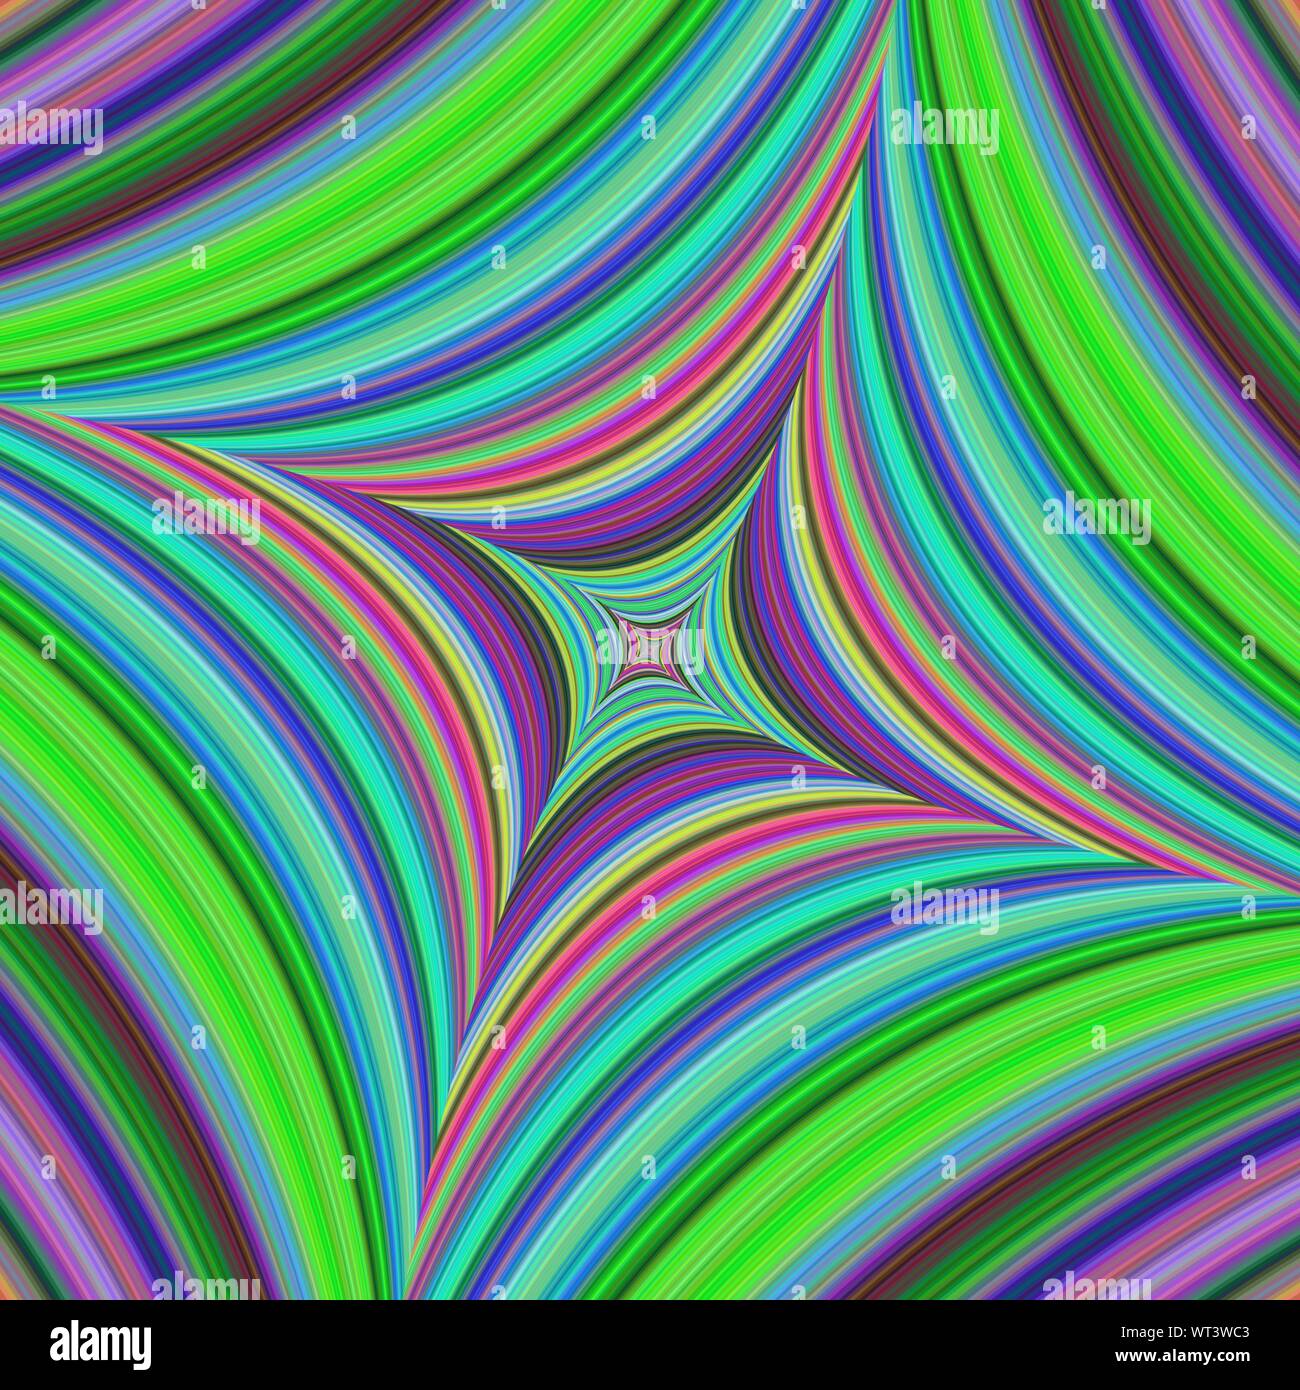 Abstract psychedelic computer generated quadratic background design Stock Vector